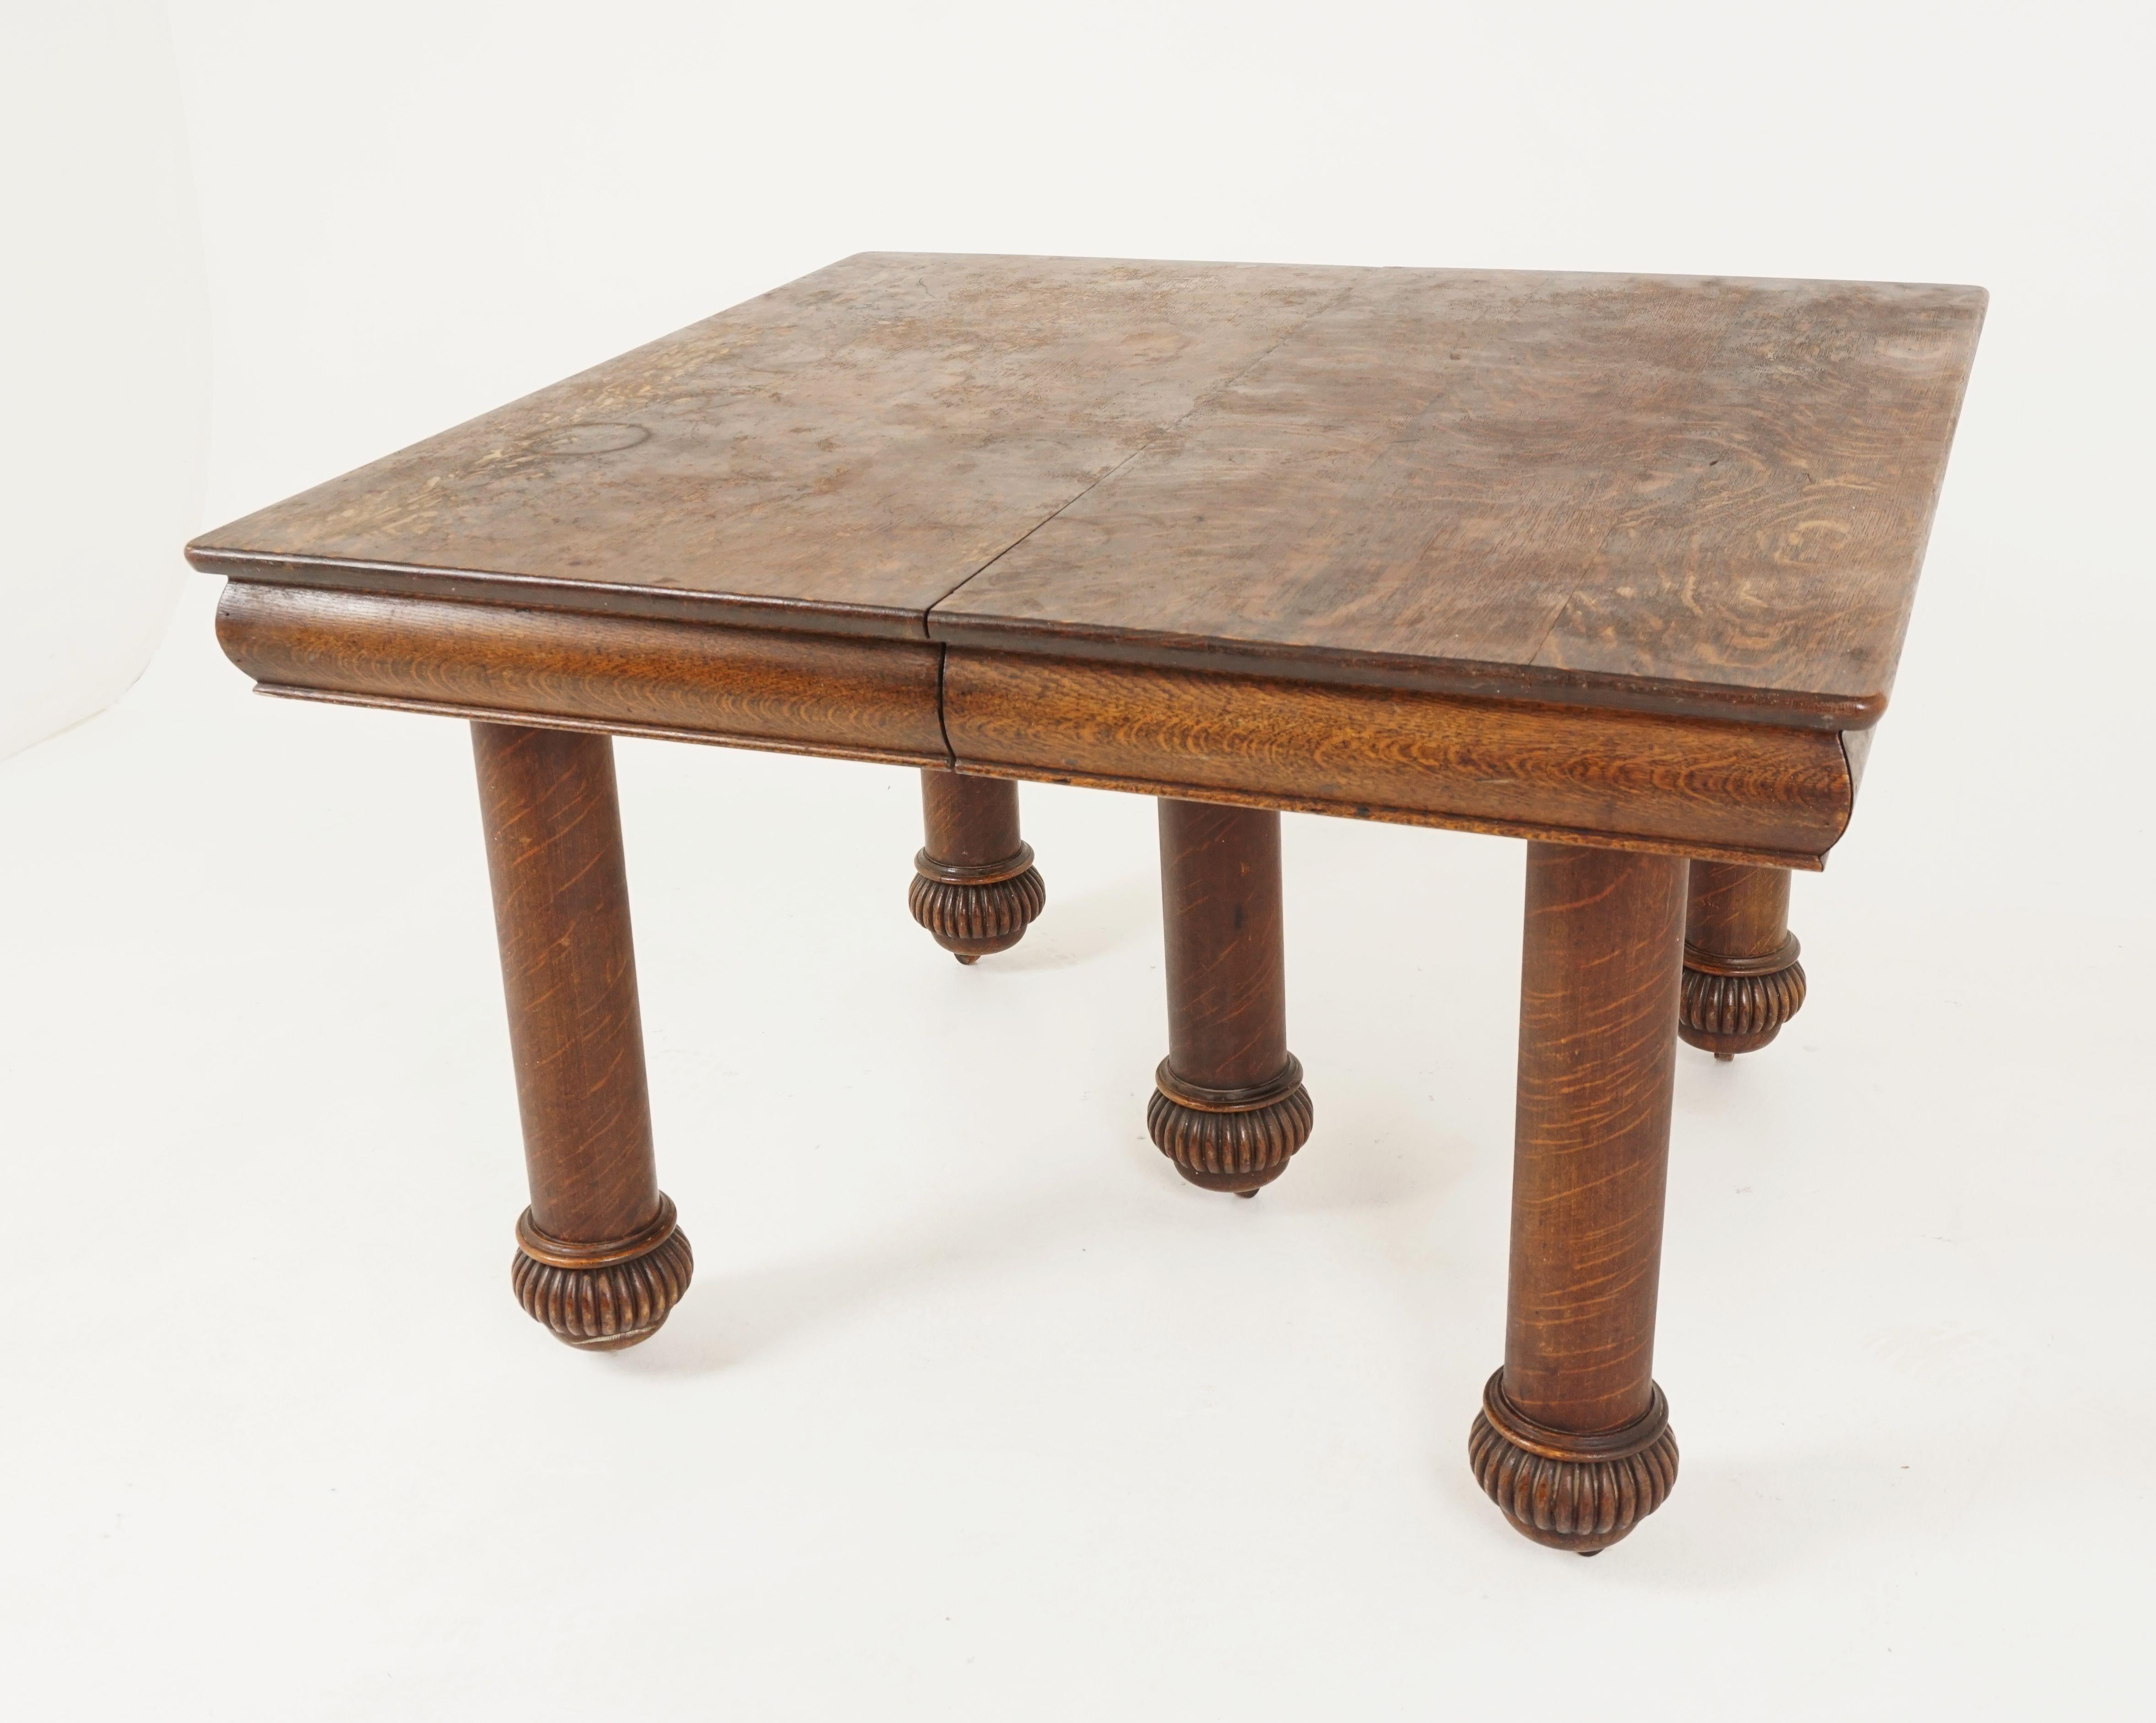 Antique tiger oak table, square dining table, 5 leaves, American 1910, B2480

American 1910
Solid tiger oak
Original finish
Square tiger oak top
Beveled underskirt
All standing on five turned legs with seeded base
All standing on original